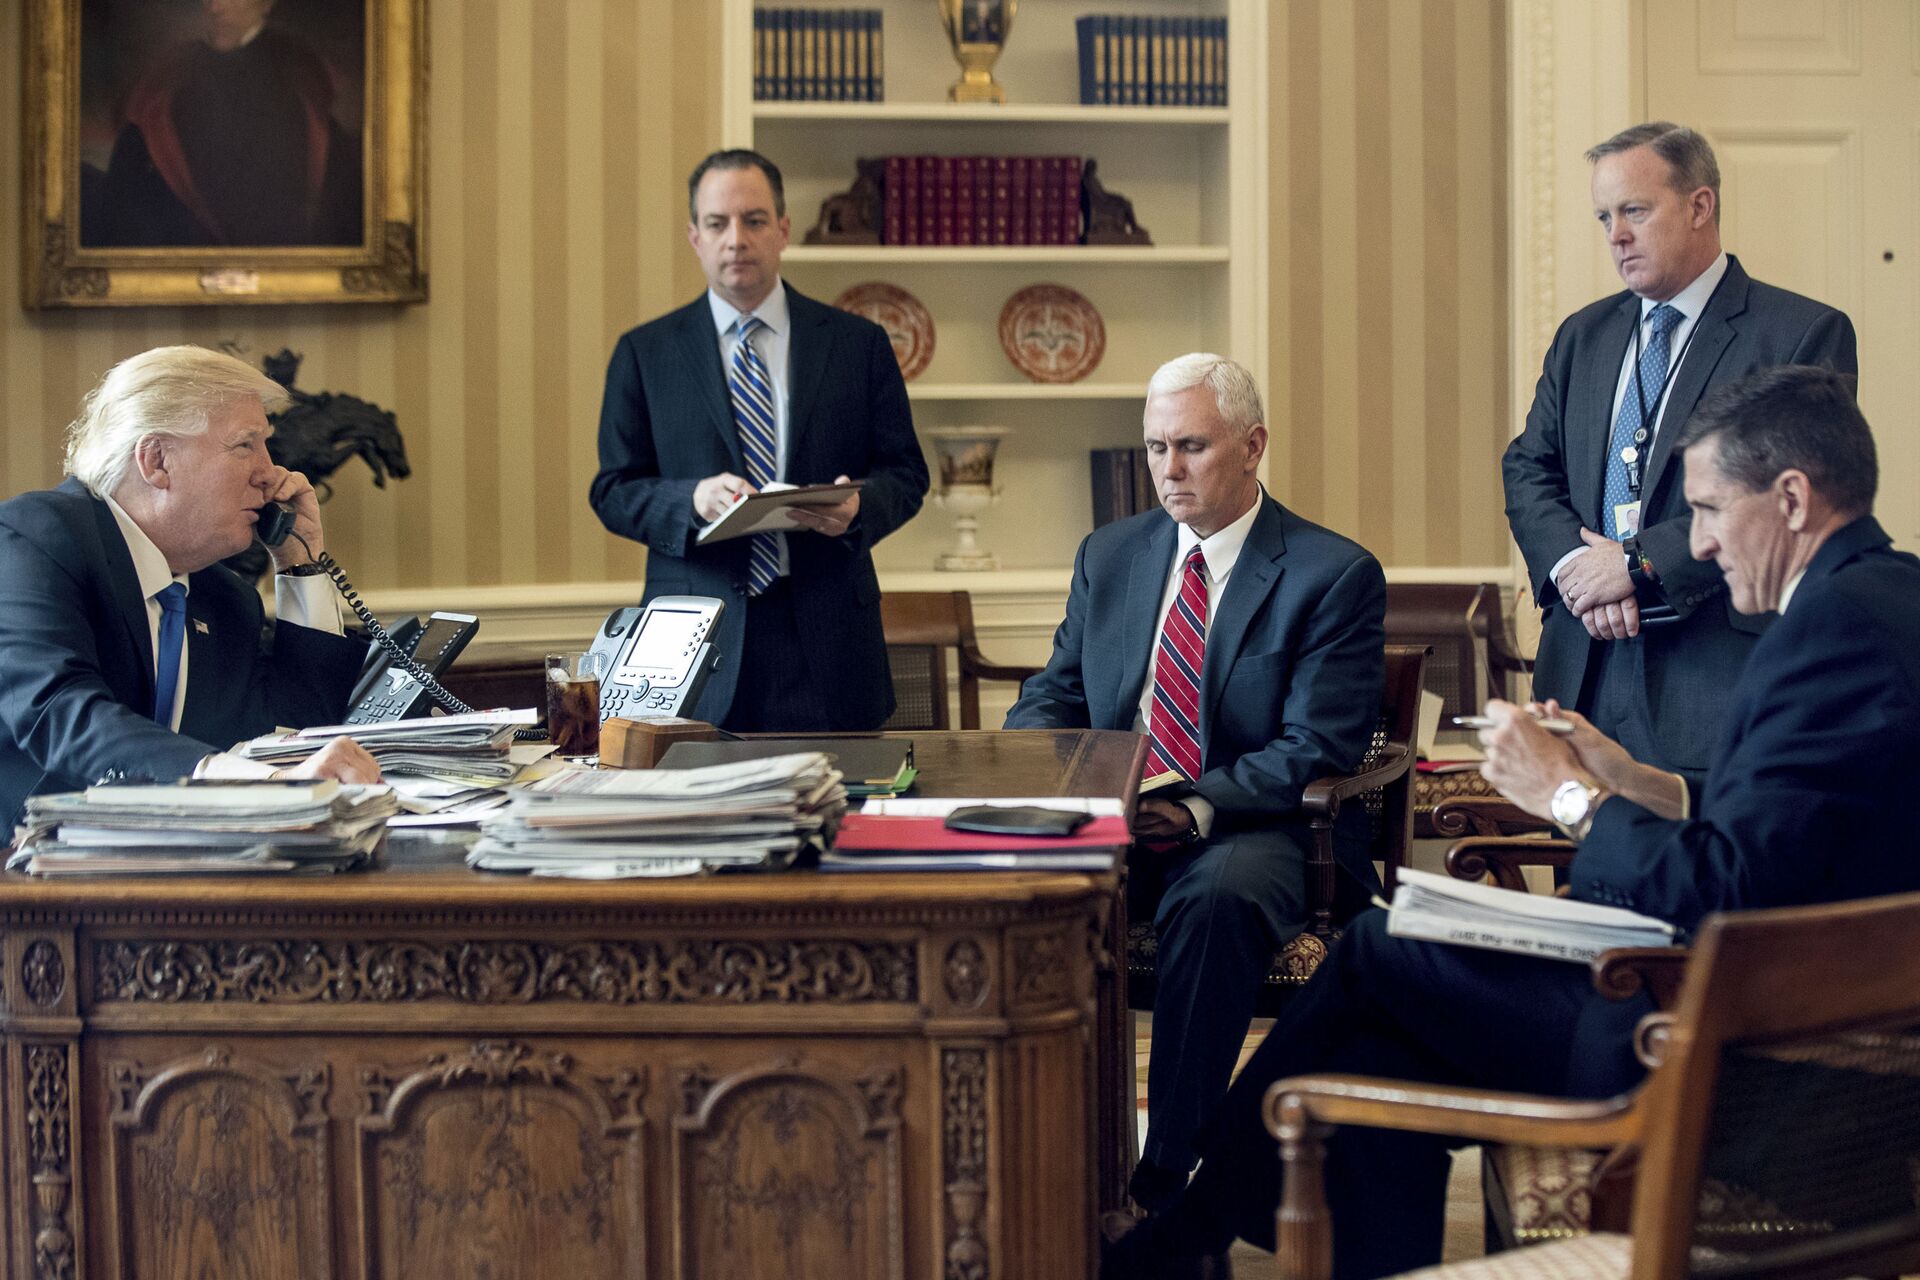  In this Jan. 28, 2017, file photo, President Donald Trump accompanied by, from second from left, Chief of Staff Reince Priebus, Vice President Mike Pence, White House press secretary Sean Spicer and National Security Adviser Michael Flynn speaks on the phone with Russian President Vladimir Putin in the Oval Office at the White House in Washington - Sputnik International, 1920, 07.09.2021